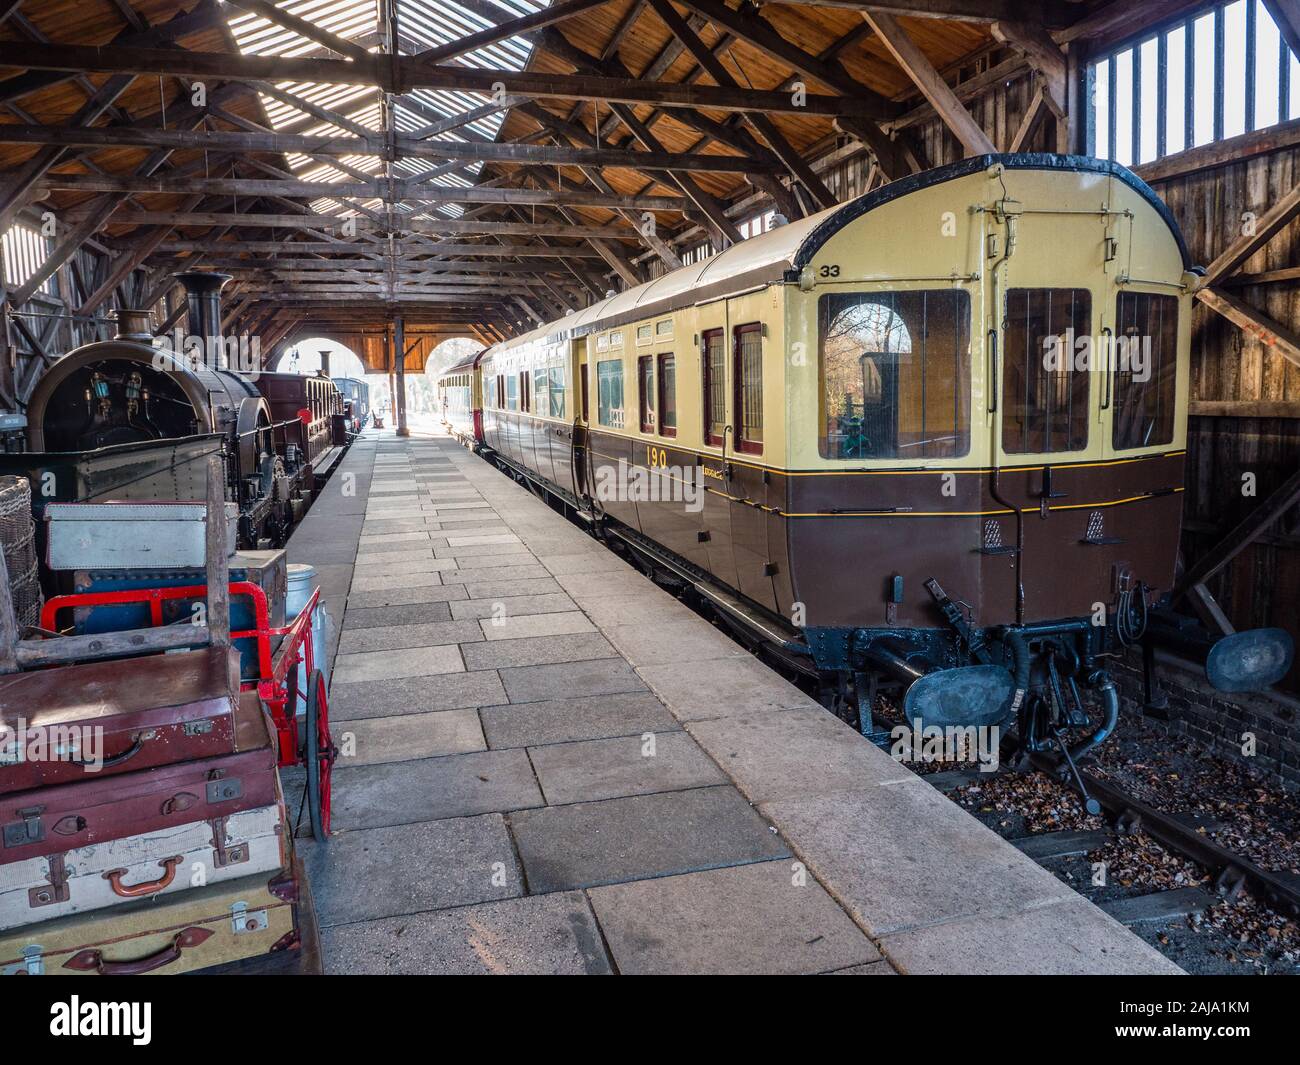 Collett Auto Trailer, Didcot Railway Center, Oxfordshire, Angleterre, Royaume-Uni, Gb. Banque D'Images